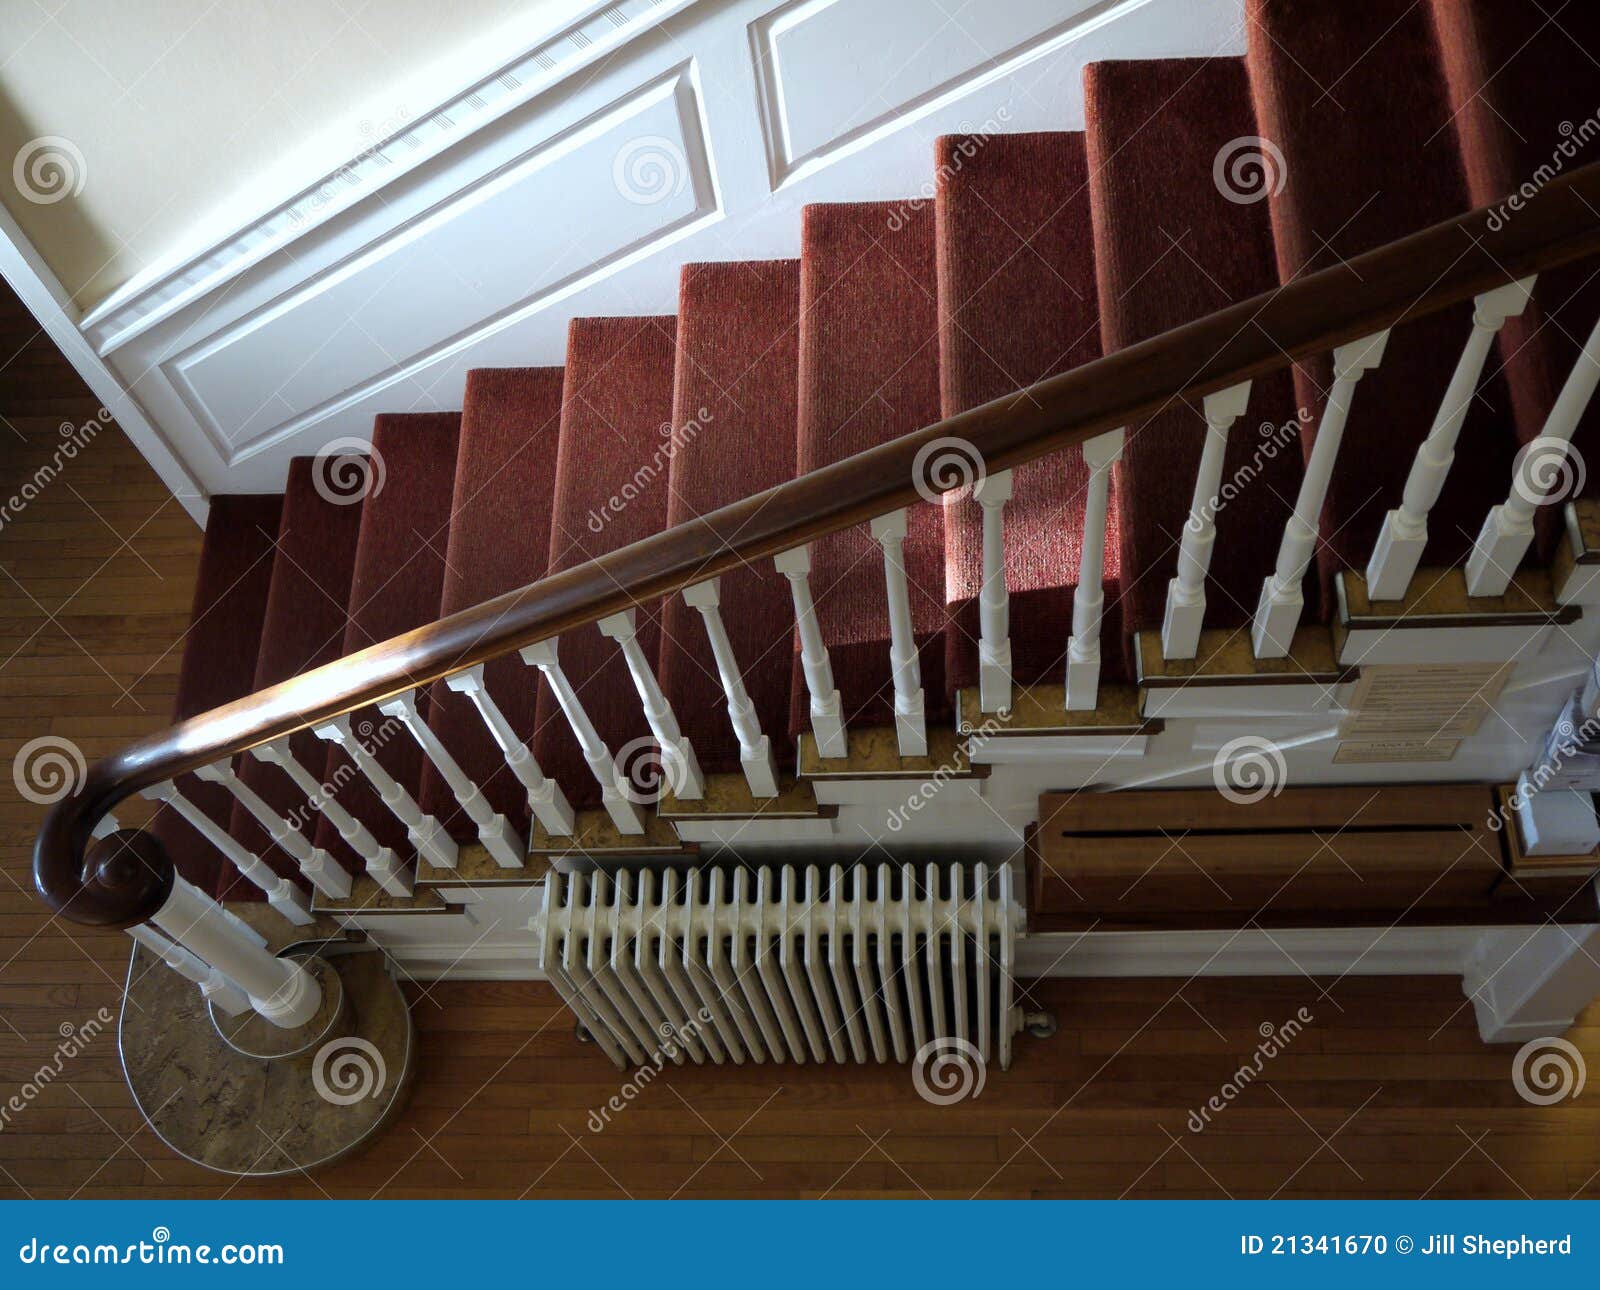 home: sunlit staircase with red carpet